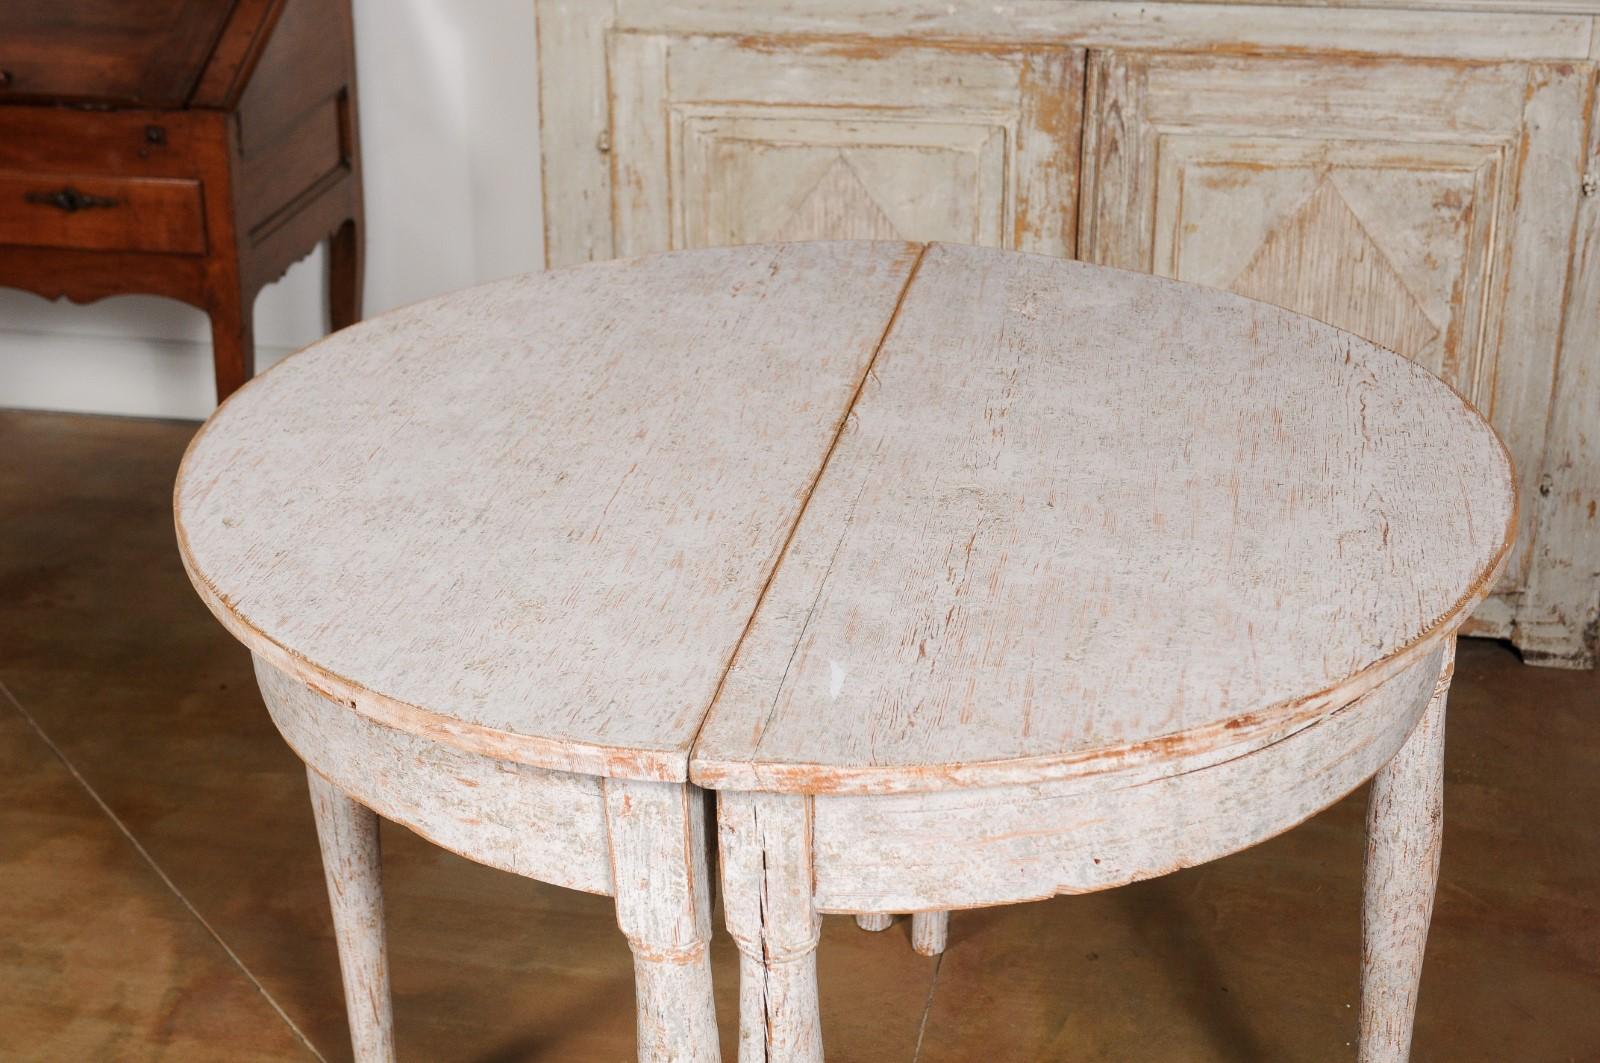 Pair of 1840s Swedish Painted Wood Demilune Tables with Distressed Finish 4